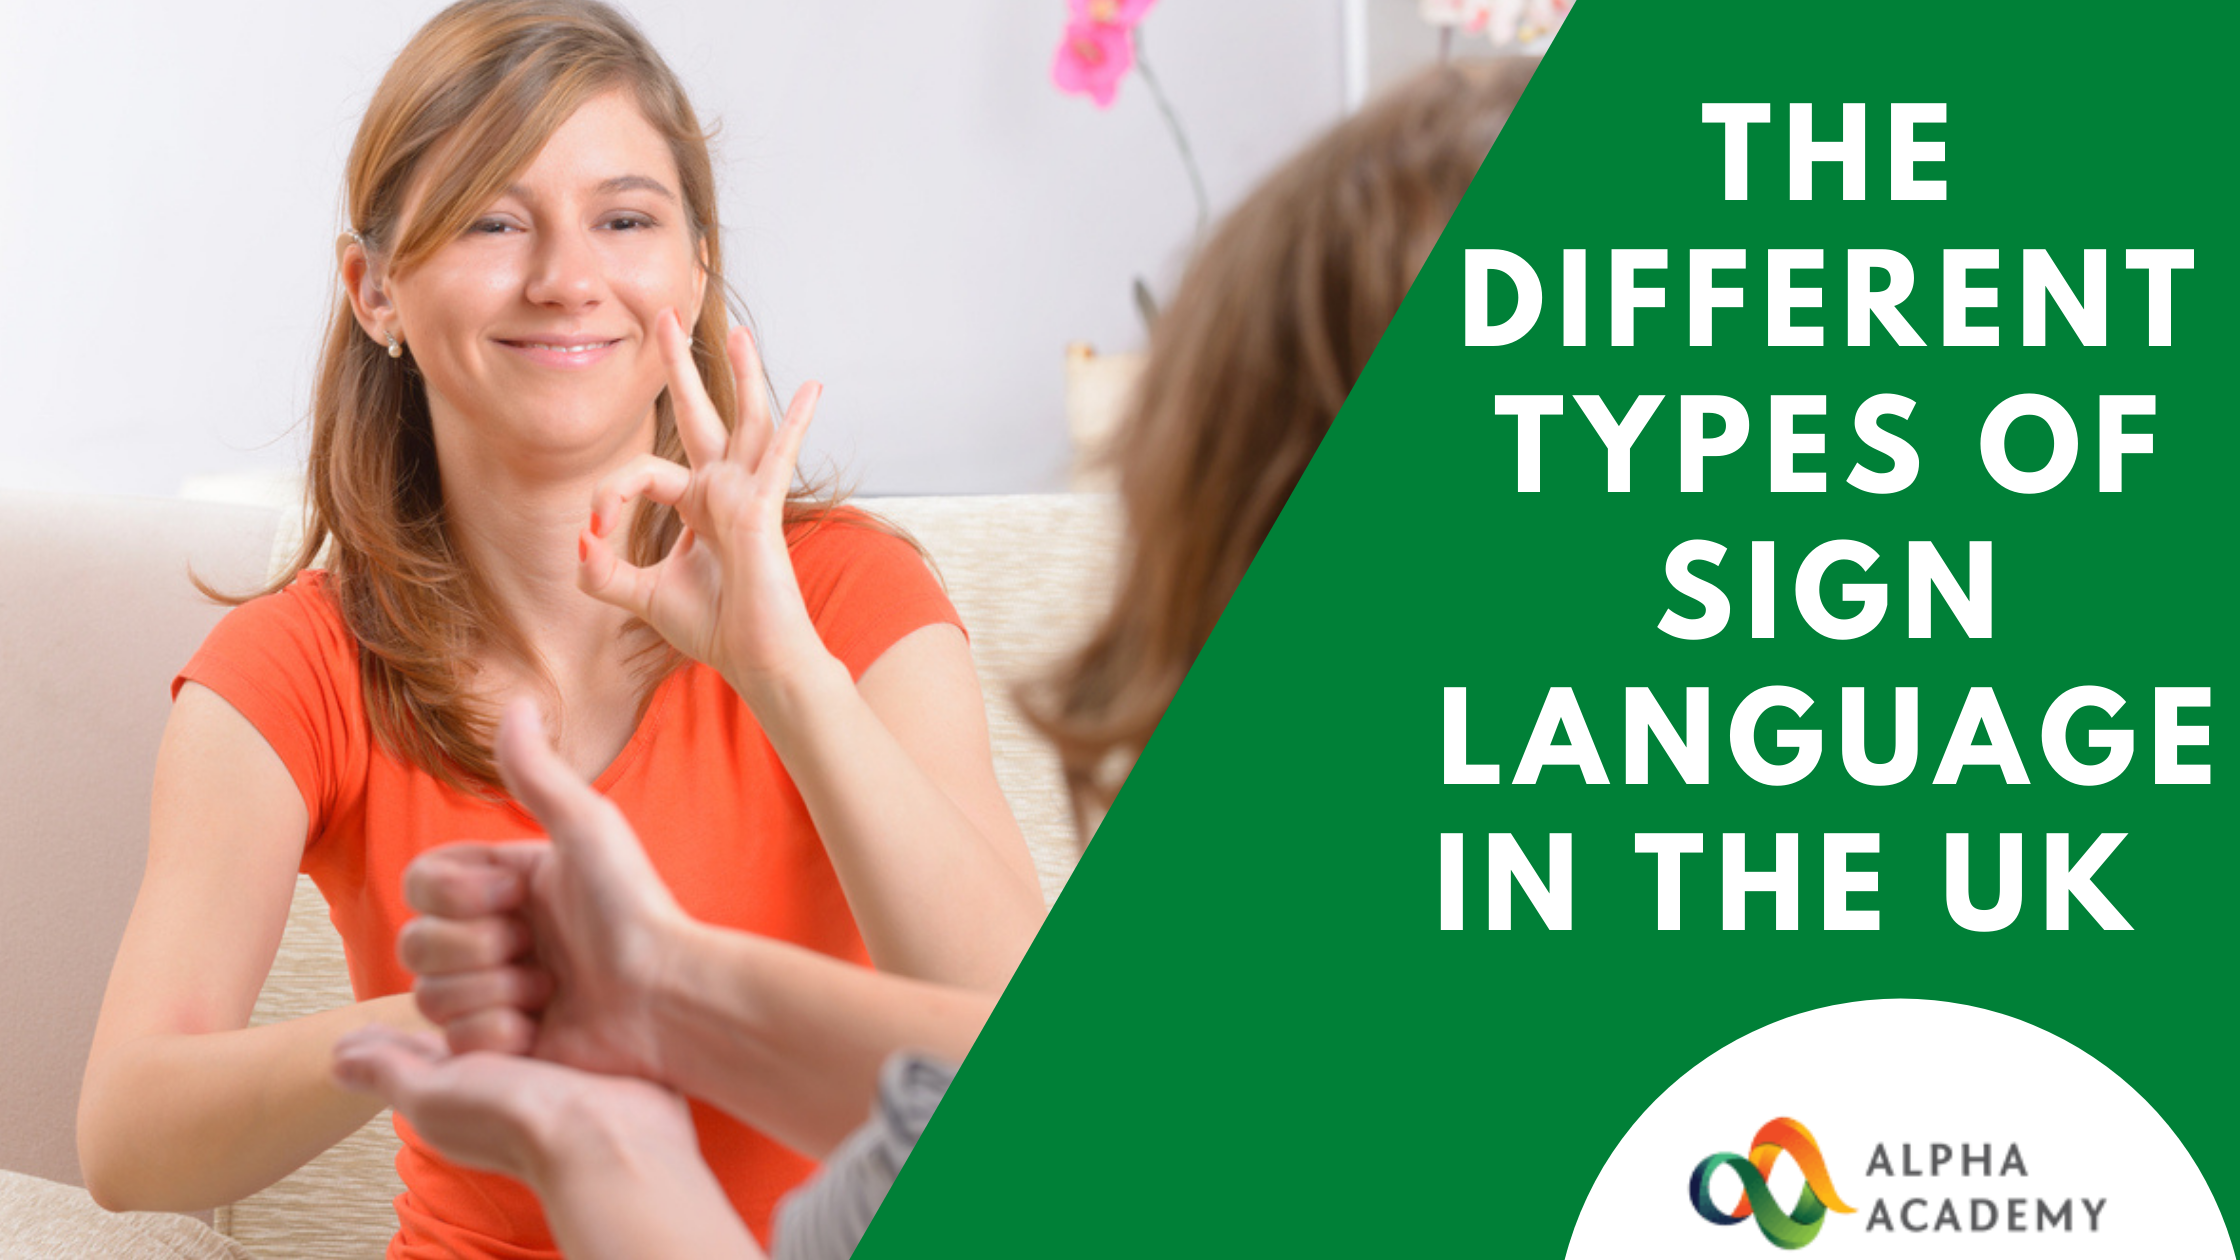 The Different Types of Sign Language in the UK